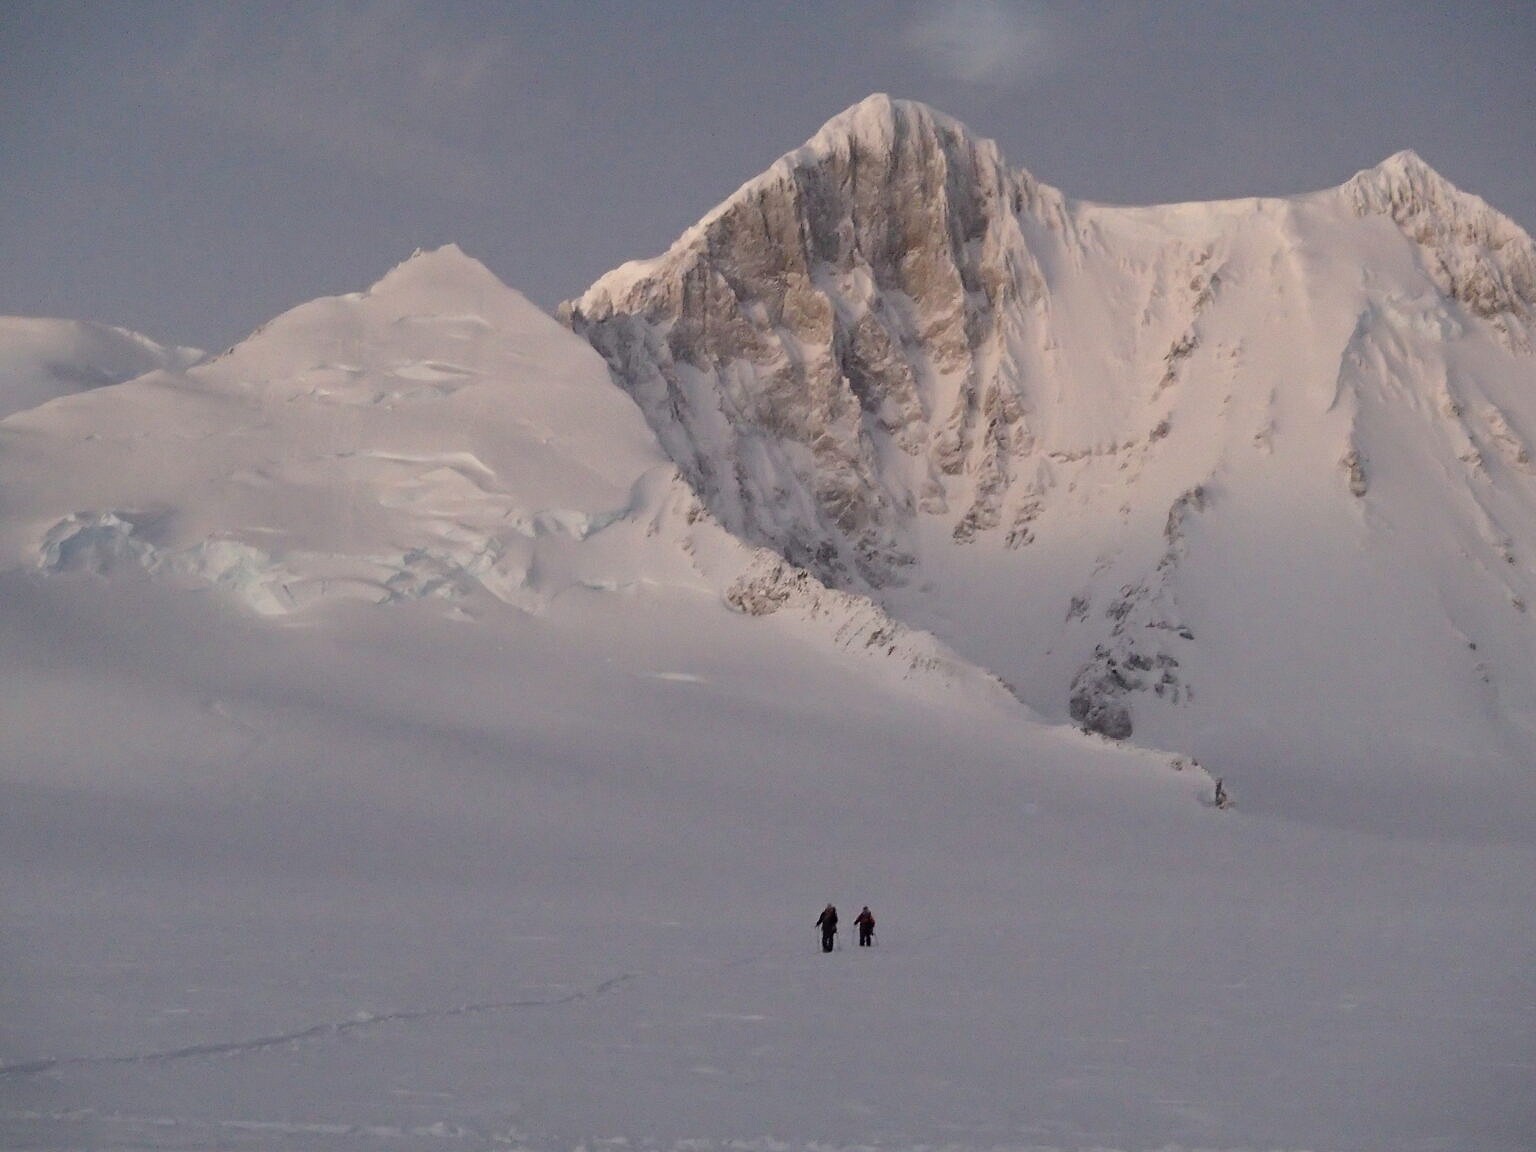 A party returning to camp after climbing Myth (the smaller peak on the left)  © Tom Sylvester